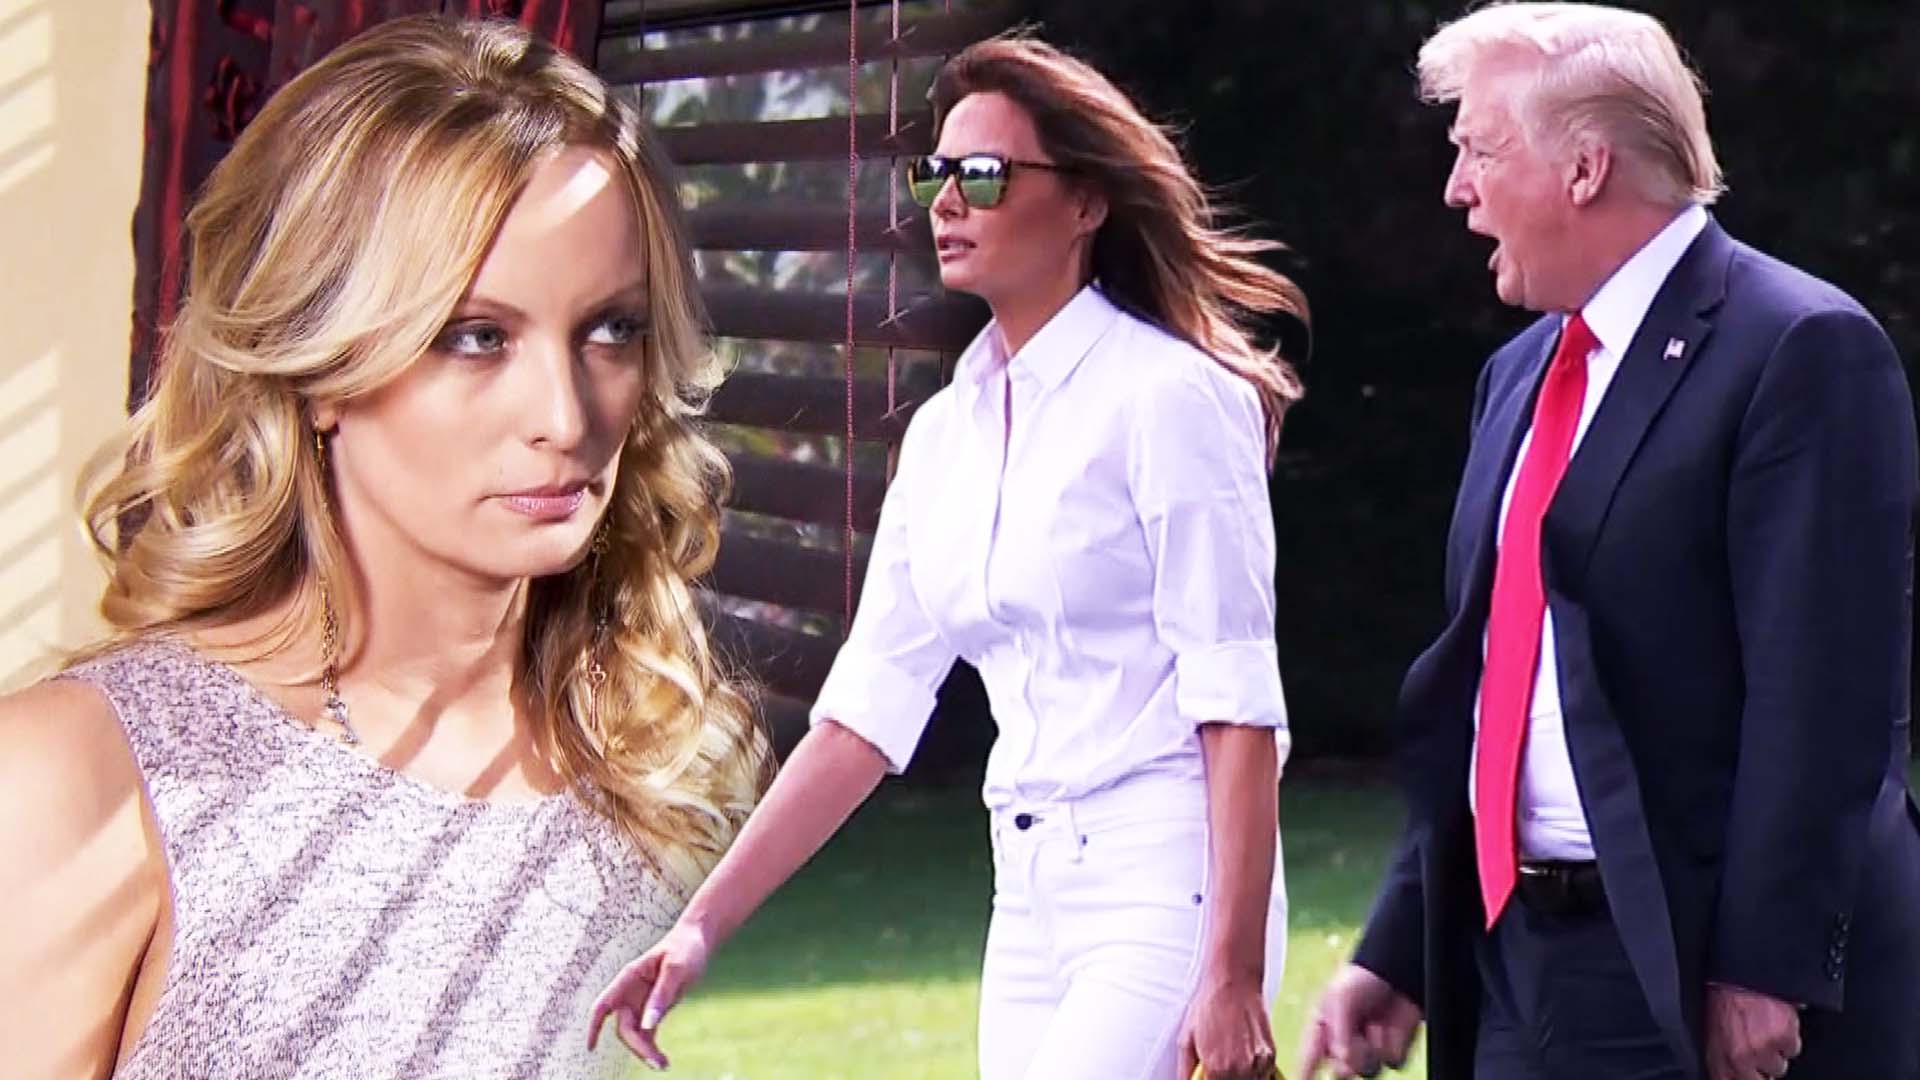 Atm Porn Stars Who Have Done - Melania Trump Unlikely to Stand by Donald if Indicted Says Former Aide |  Inside Edition